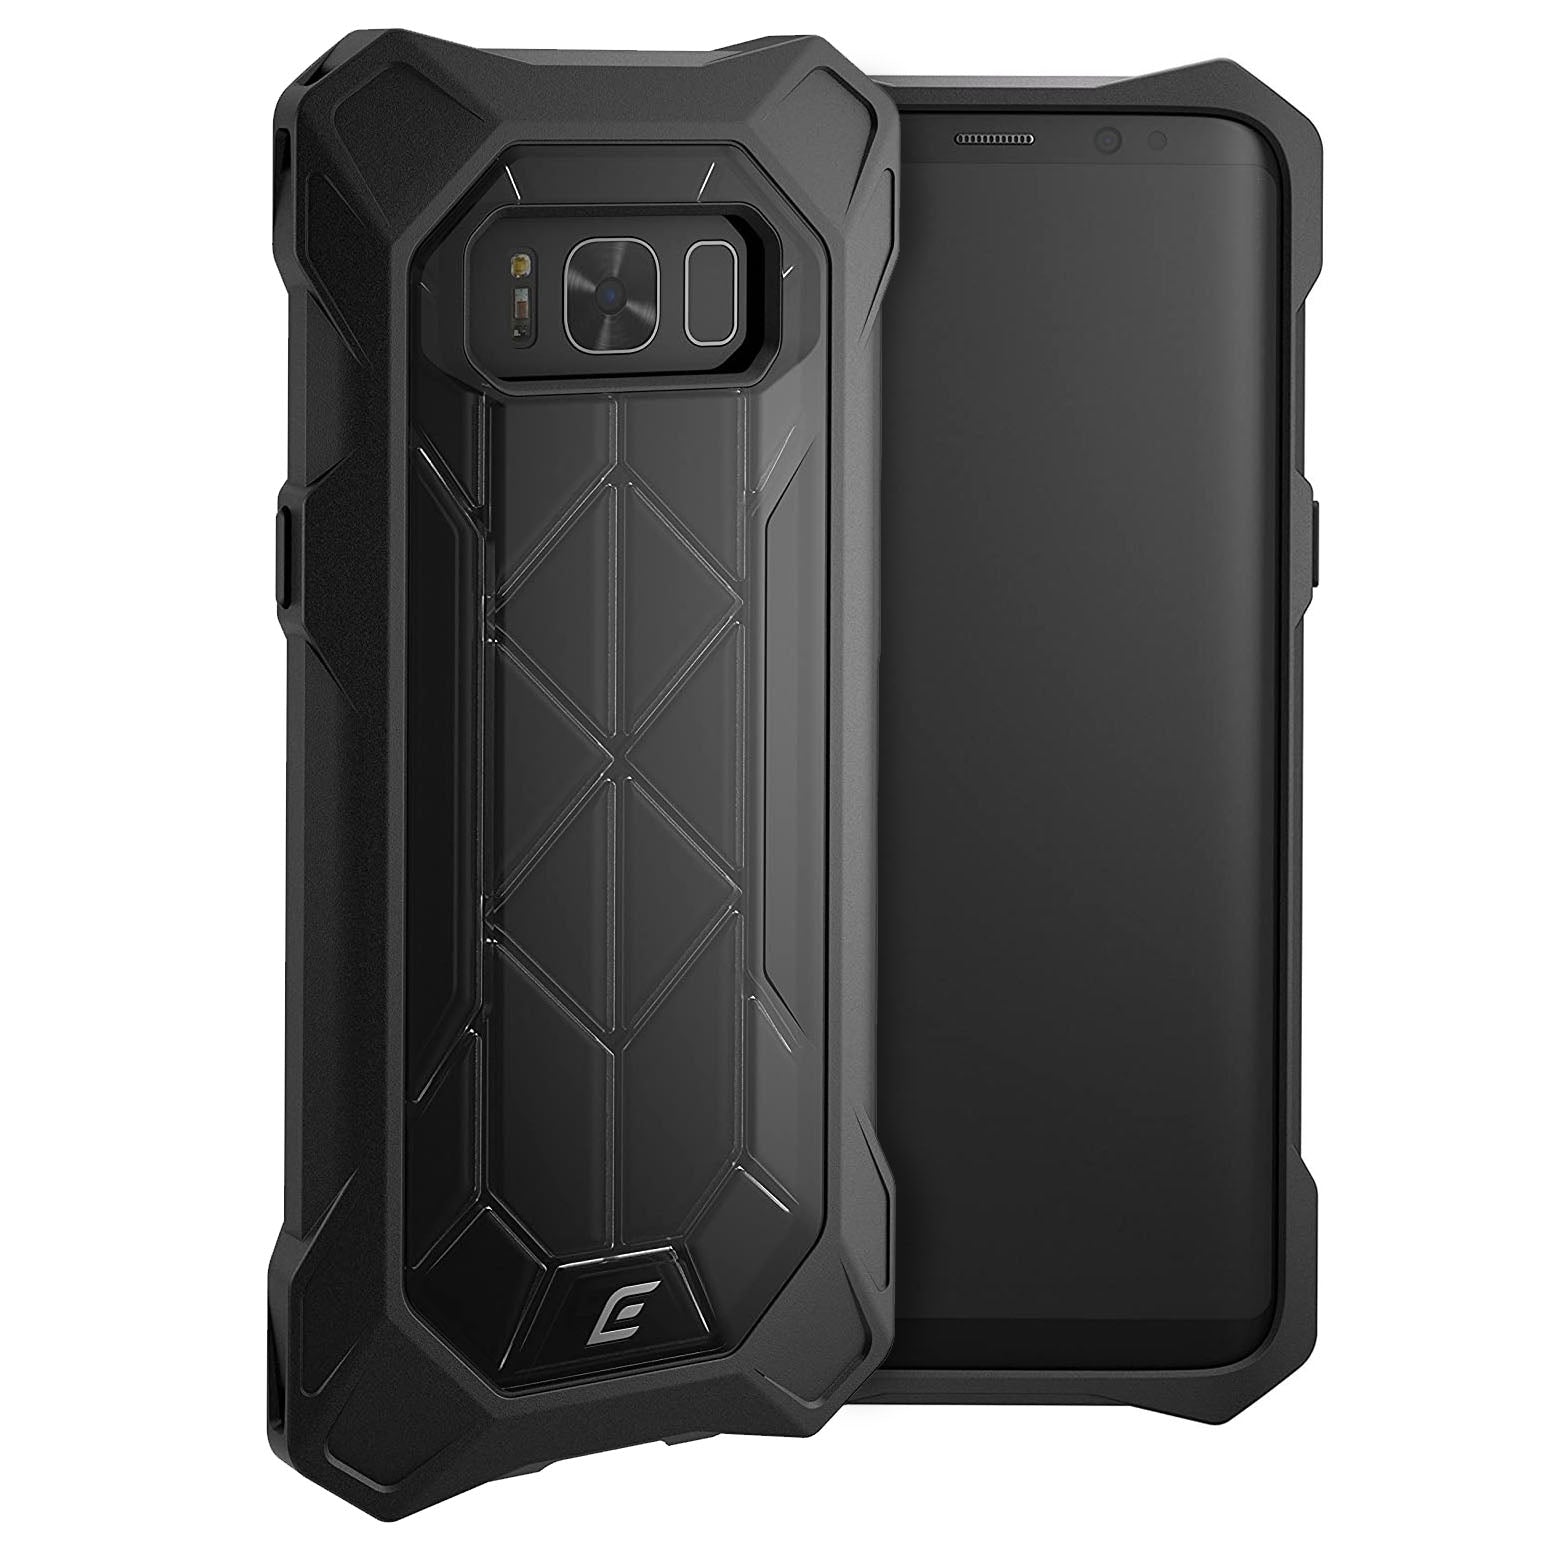 Samsung Galaxy S8 Cases, Covers &amp; Accessories